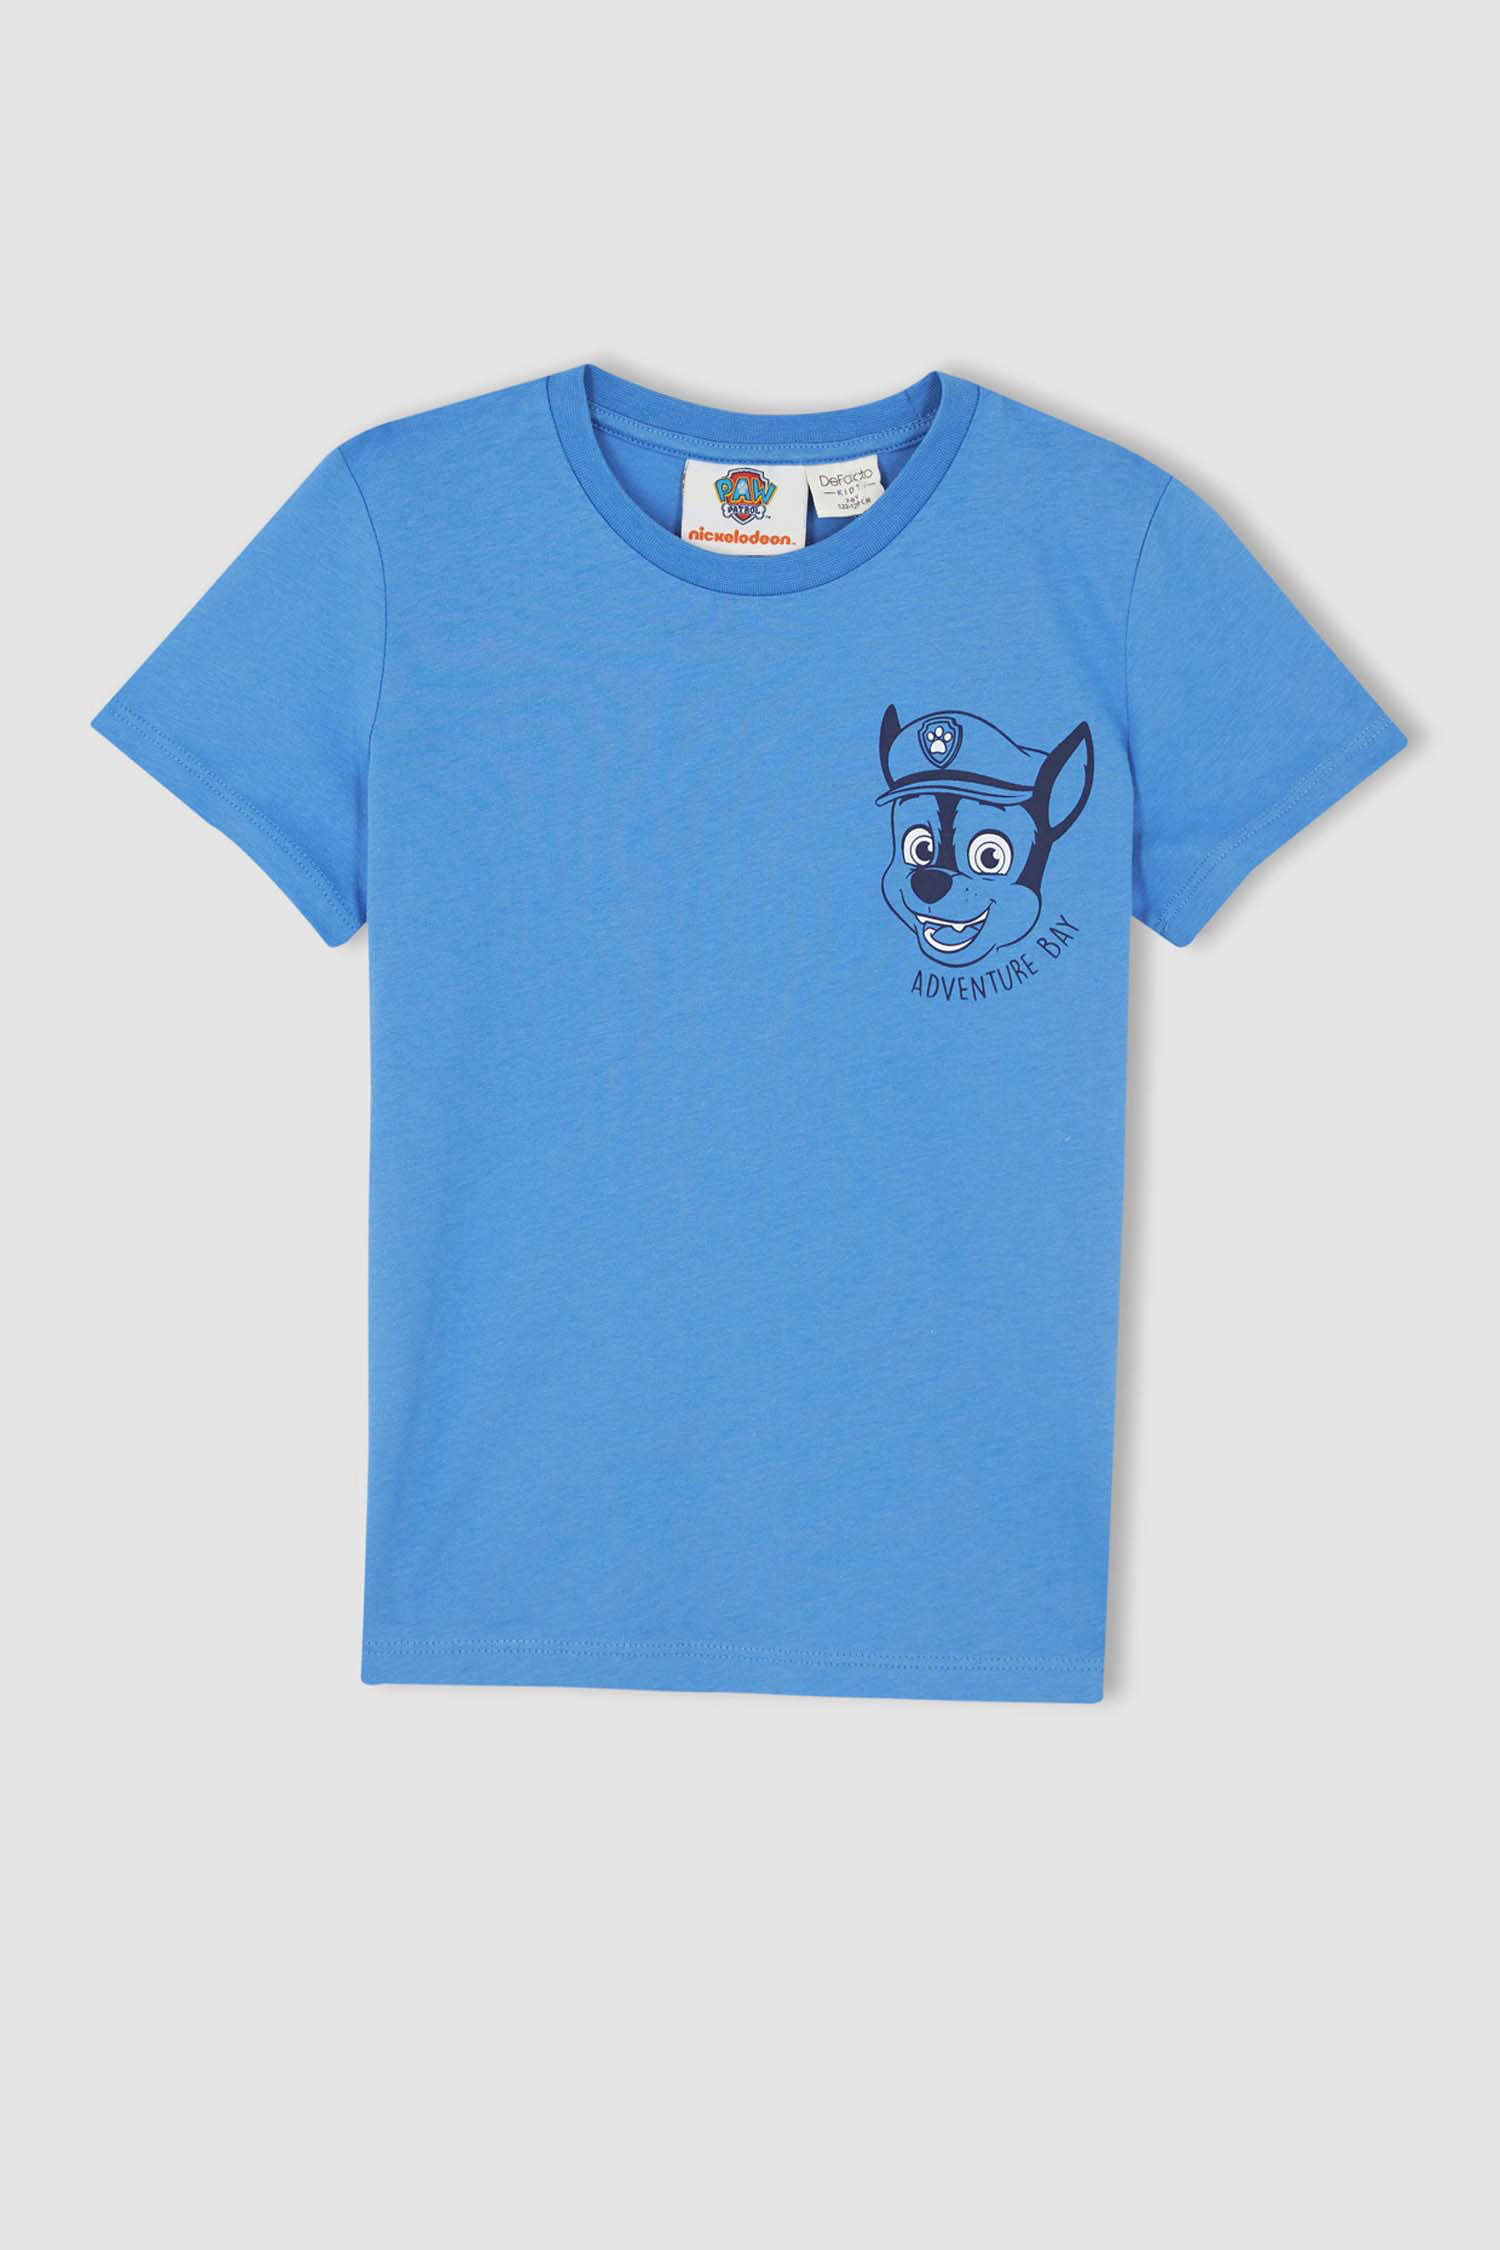 Paw Patrol Children's Kids Boys Short Sleeve T-shirt Official Age 5 Years Blue 